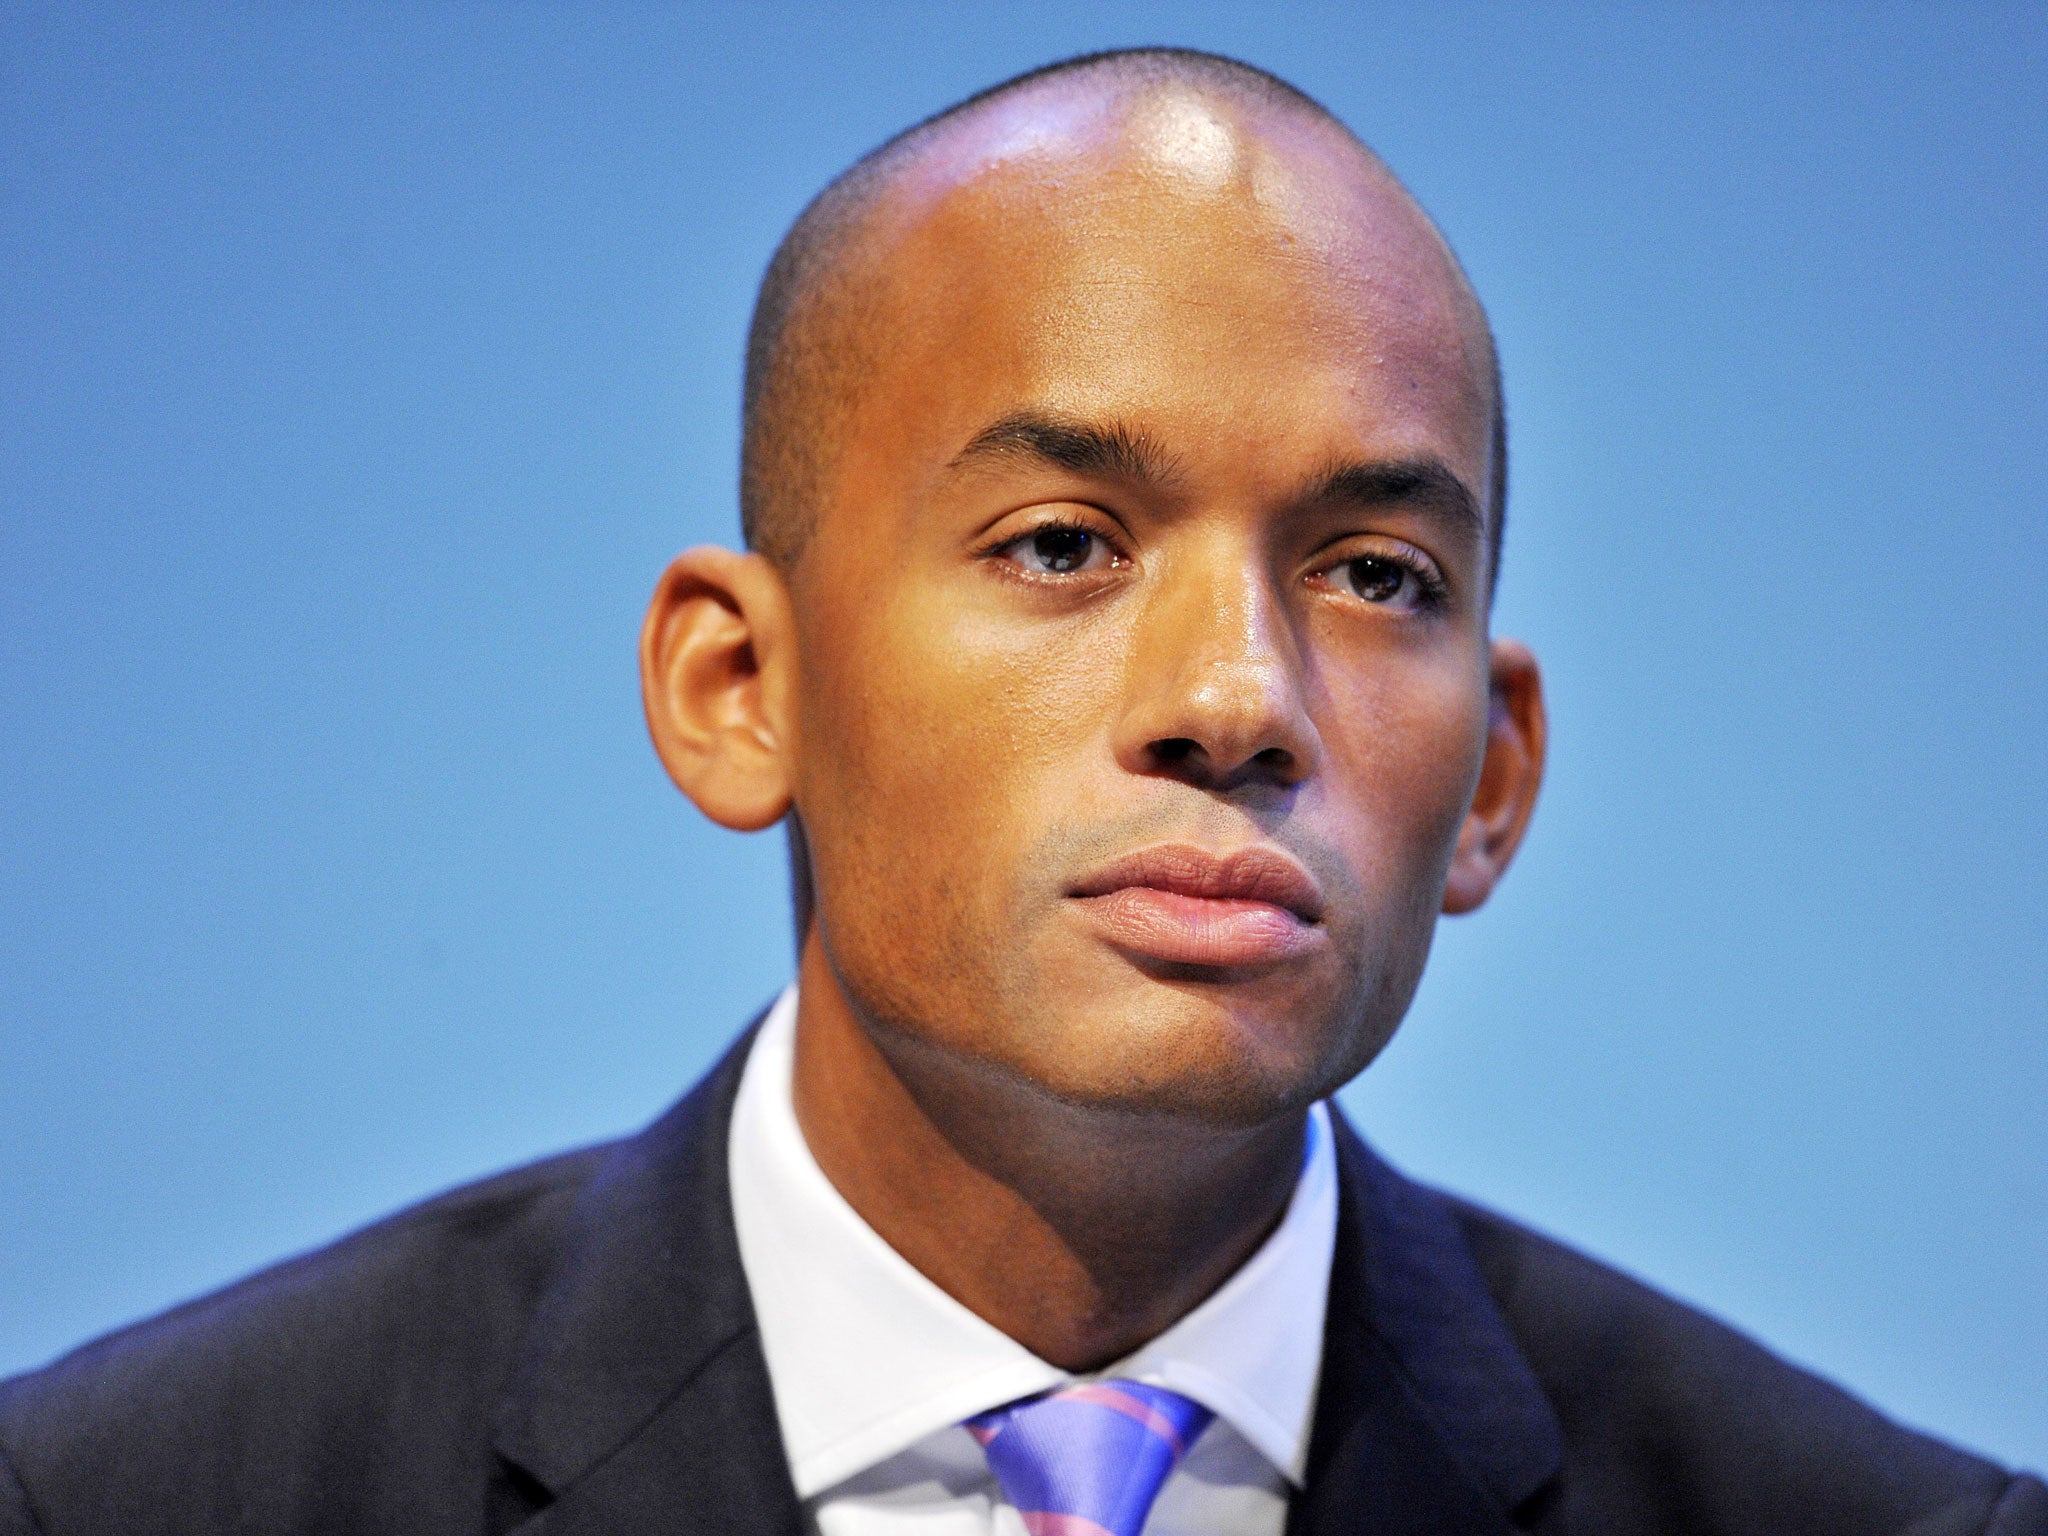 Chuka Ummuna said he had talked to some of his European counterparts about the issue of free movement of people within EU